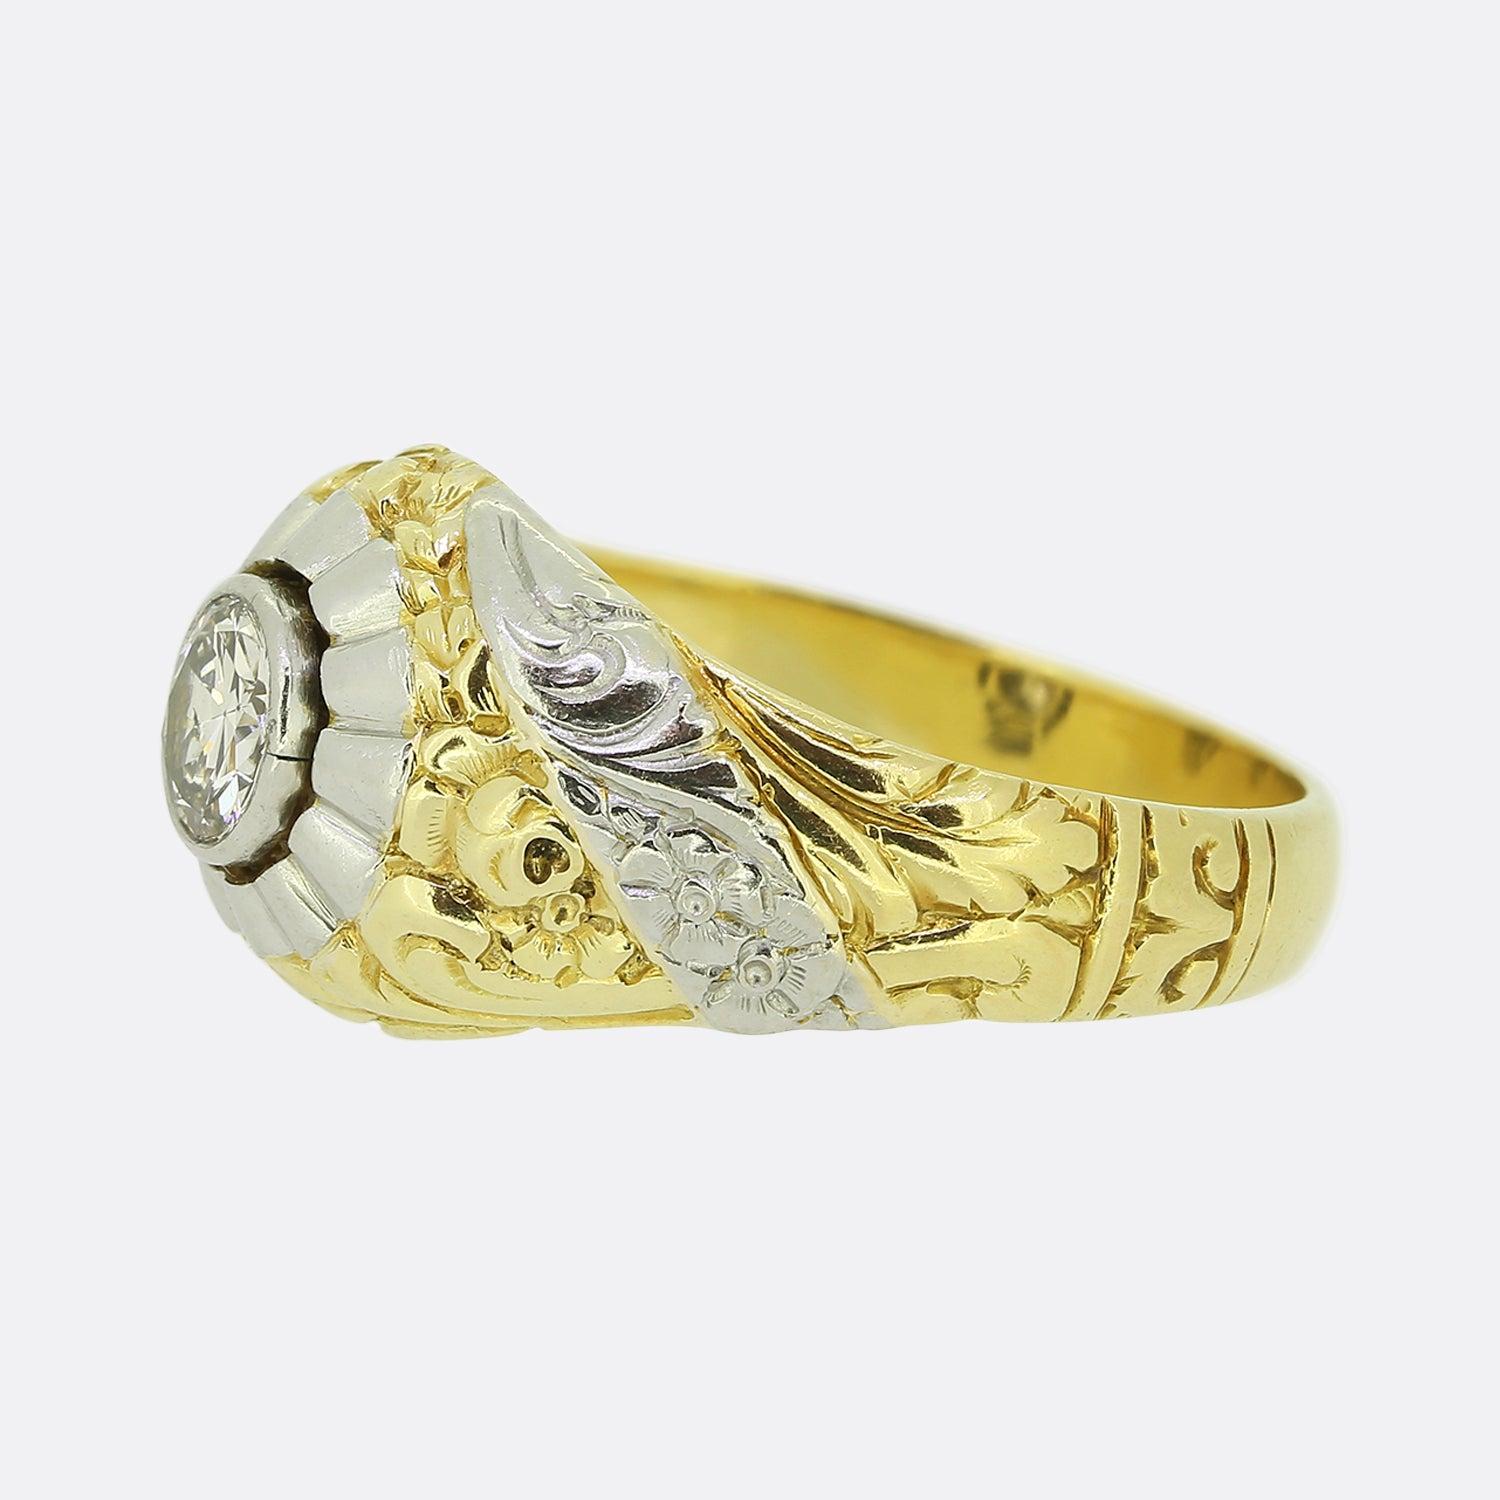 Here we have a wonderfully crafted single stone ring dating back to the 1940s. At the centre of the face we find a round brilliant cut diamond in a rub-over setting. However, this heavy piece gains its real character, firstly, from a ballerina like